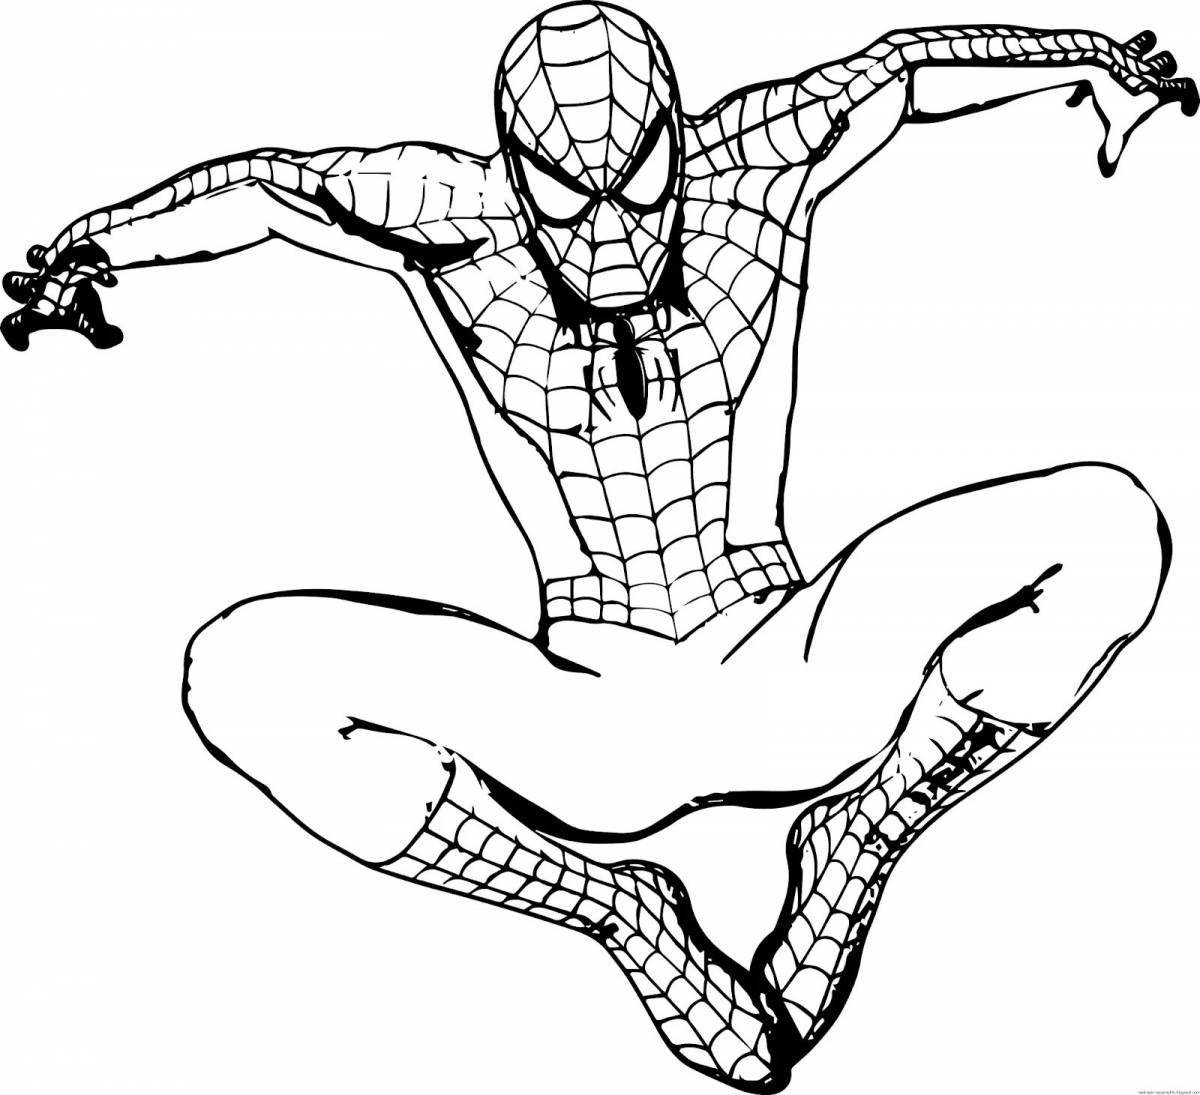 Spiderman's vibrant coloring page